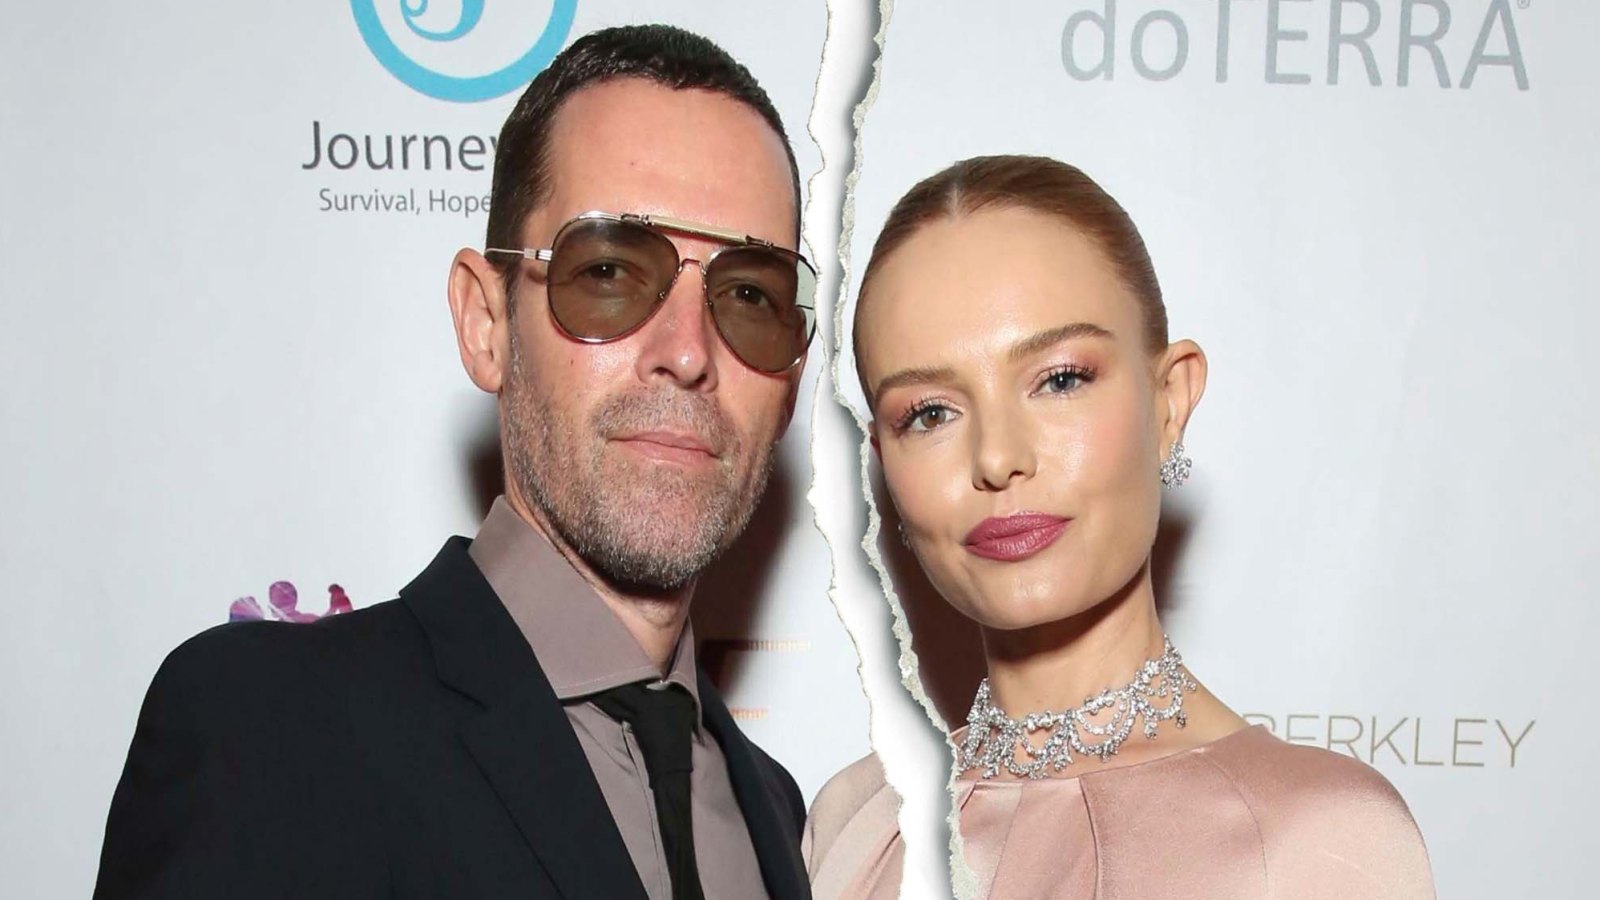 Kate Bosworth, Husband Michael Polish After 10 Years